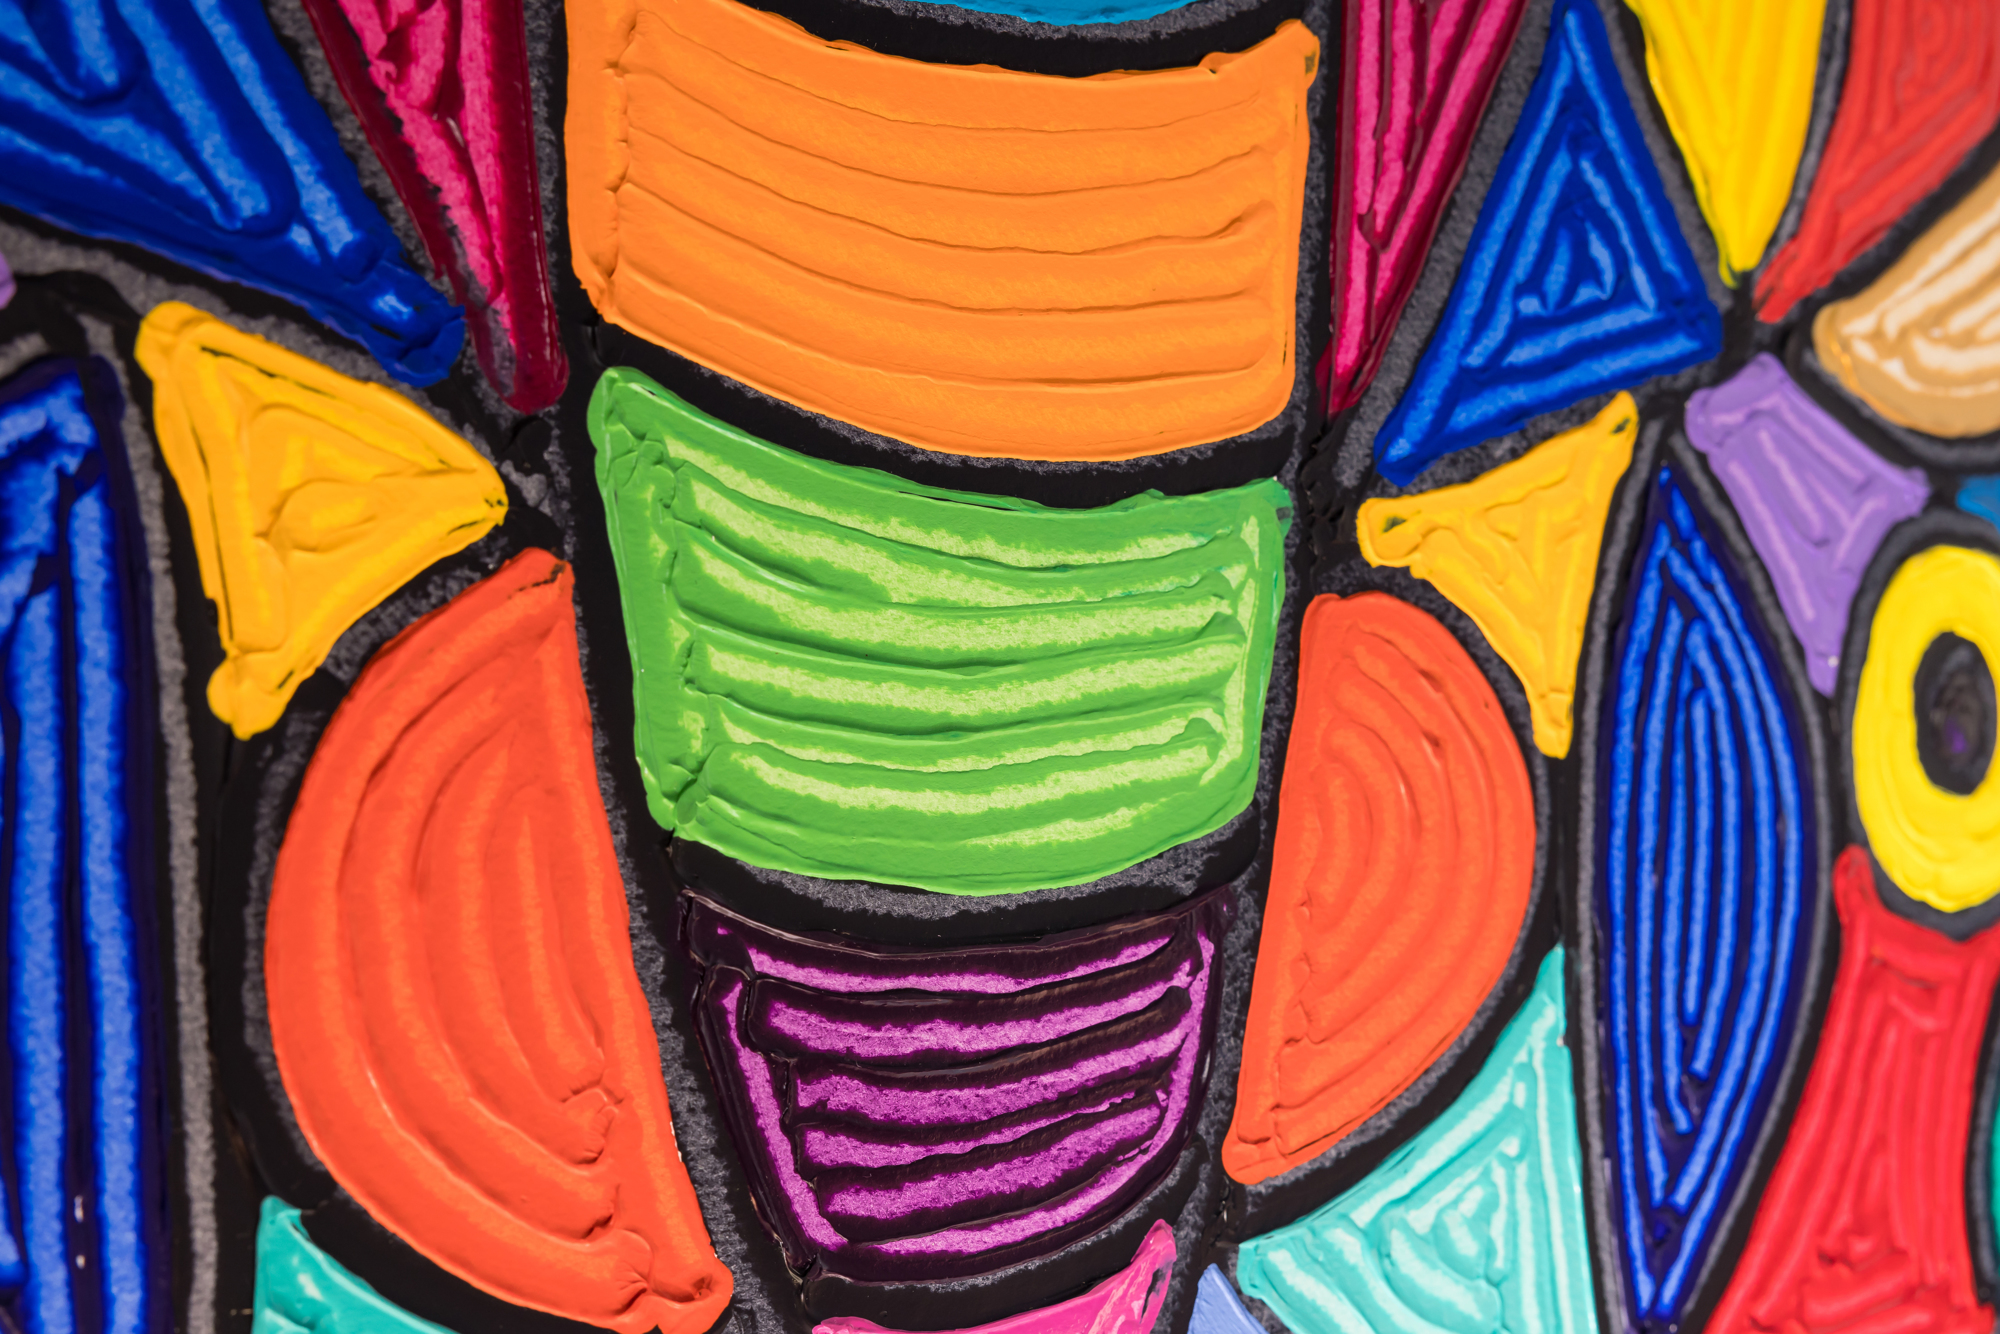 A closeup of a large, abstract butterfly painting. The butterfly is rendered in bright blocks of color, using raised paint strokes that suggest a finger painting technique. The photograph zooms in on the butterfly’s body, rendered in bold horizontal stripes of color in orange, green, and purple with black outlines. On either side of the butterfly body, there are symmetrical colored shapes that make up the wings, like dark orange semi-circles and blue, yellow, and red triangles.